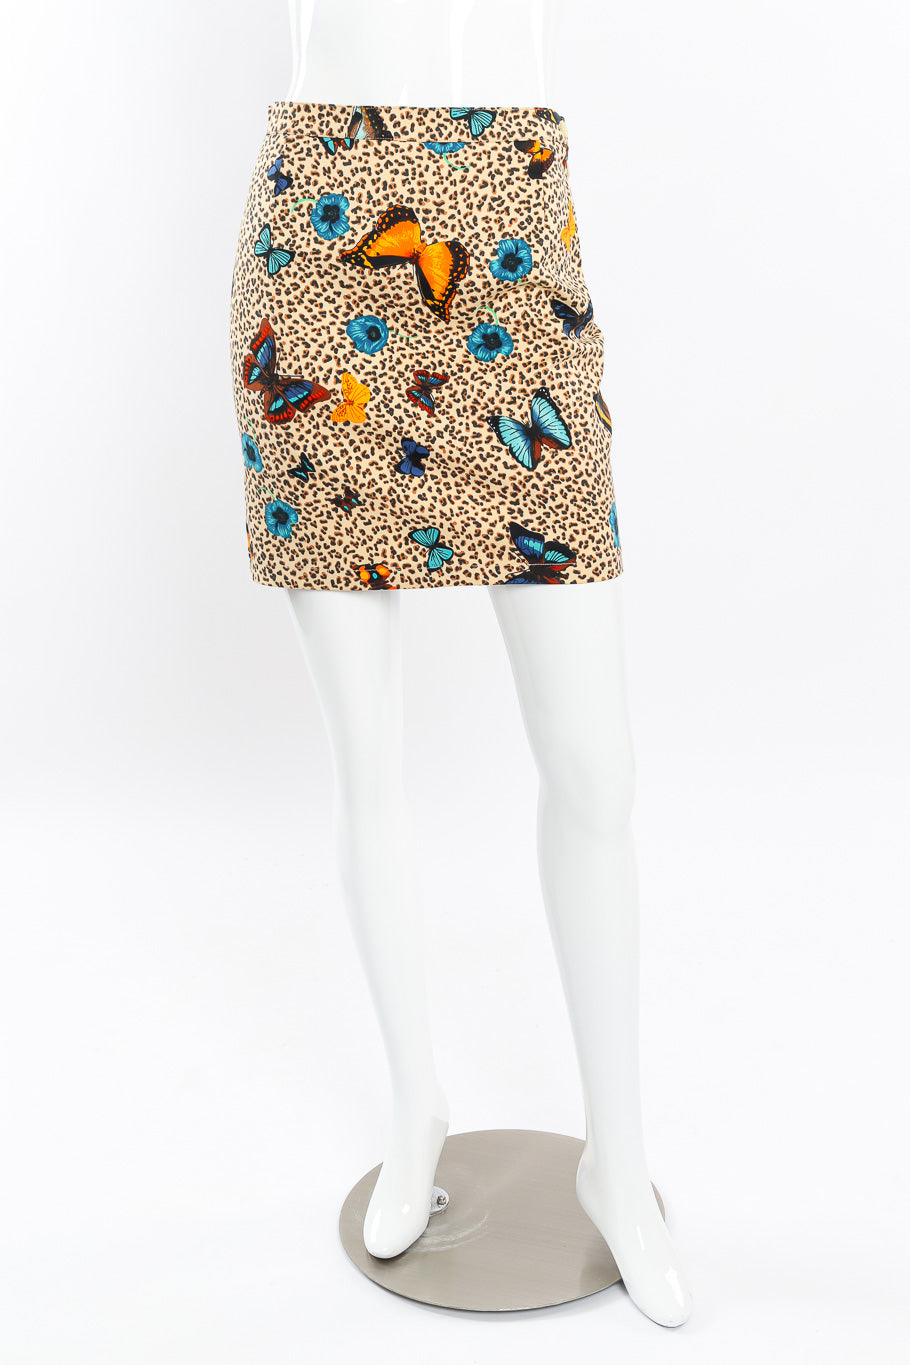 Butterfly jacket and skirt set by Kenzo on mannequin skirt front @recessla